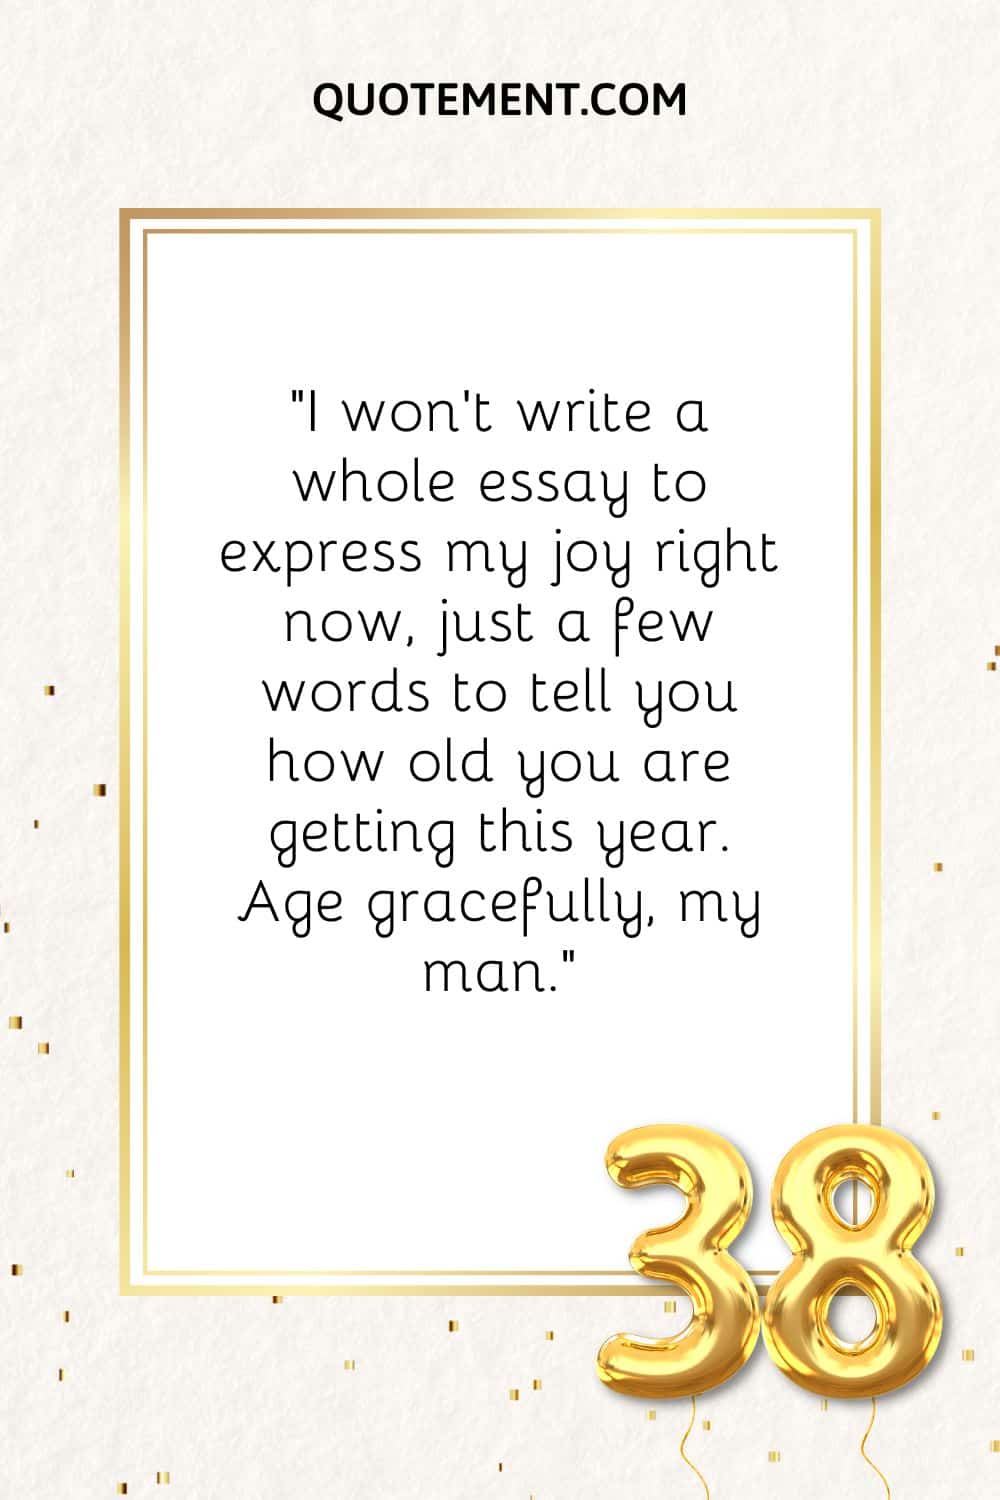 I won’t write a whole essay to express my joy right now, just a few words to tell you how old you are getting this year